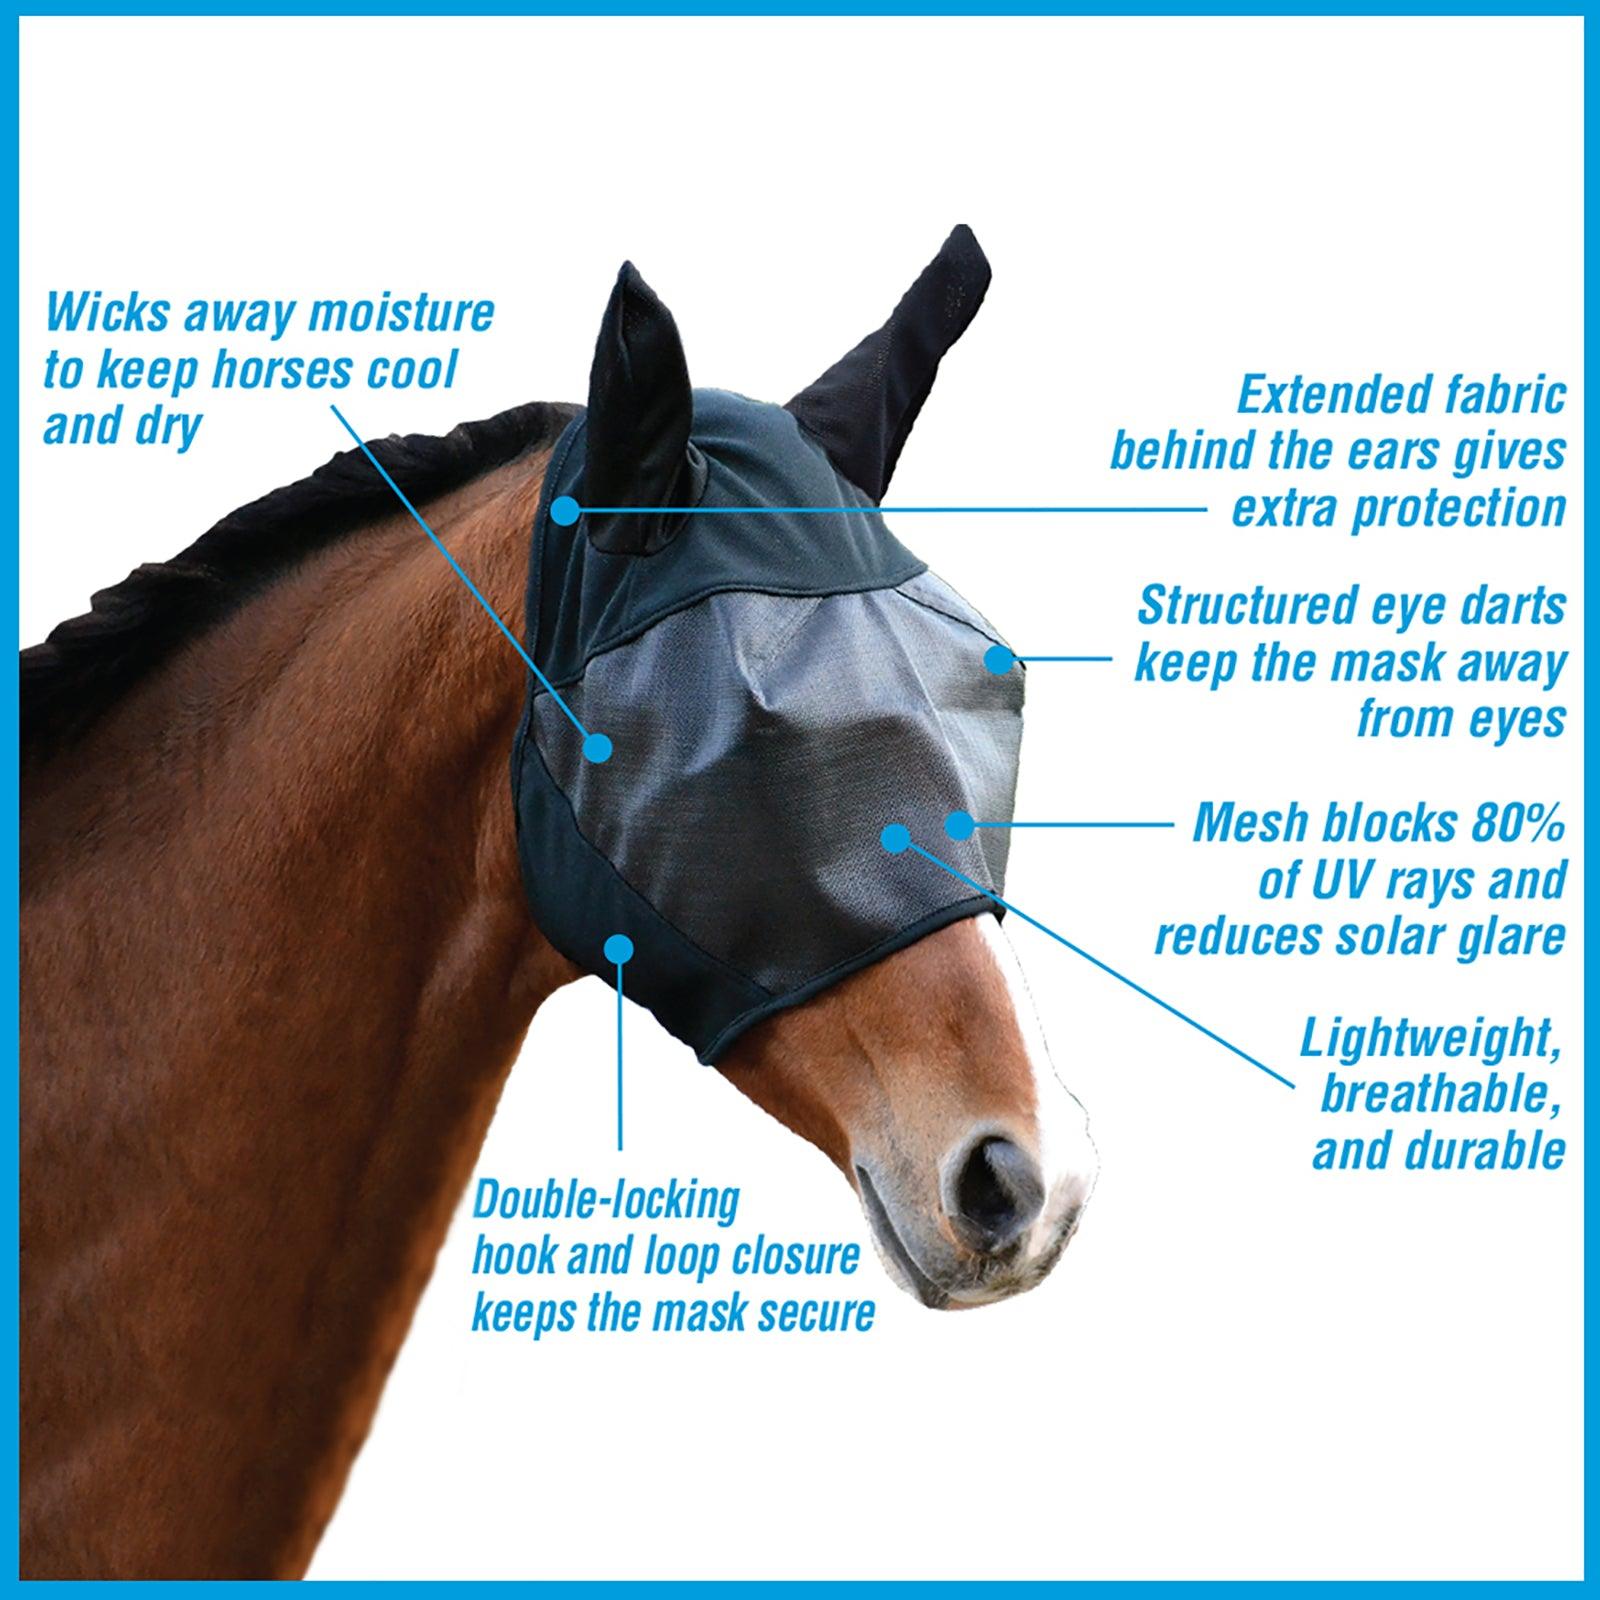 UltraShield Fly masks, wicks any moisture away to keep horses cool and dry.  Extended fabric behind the ears gives extra protection.  Structured eye darts keeps the mask away from the eyes. 